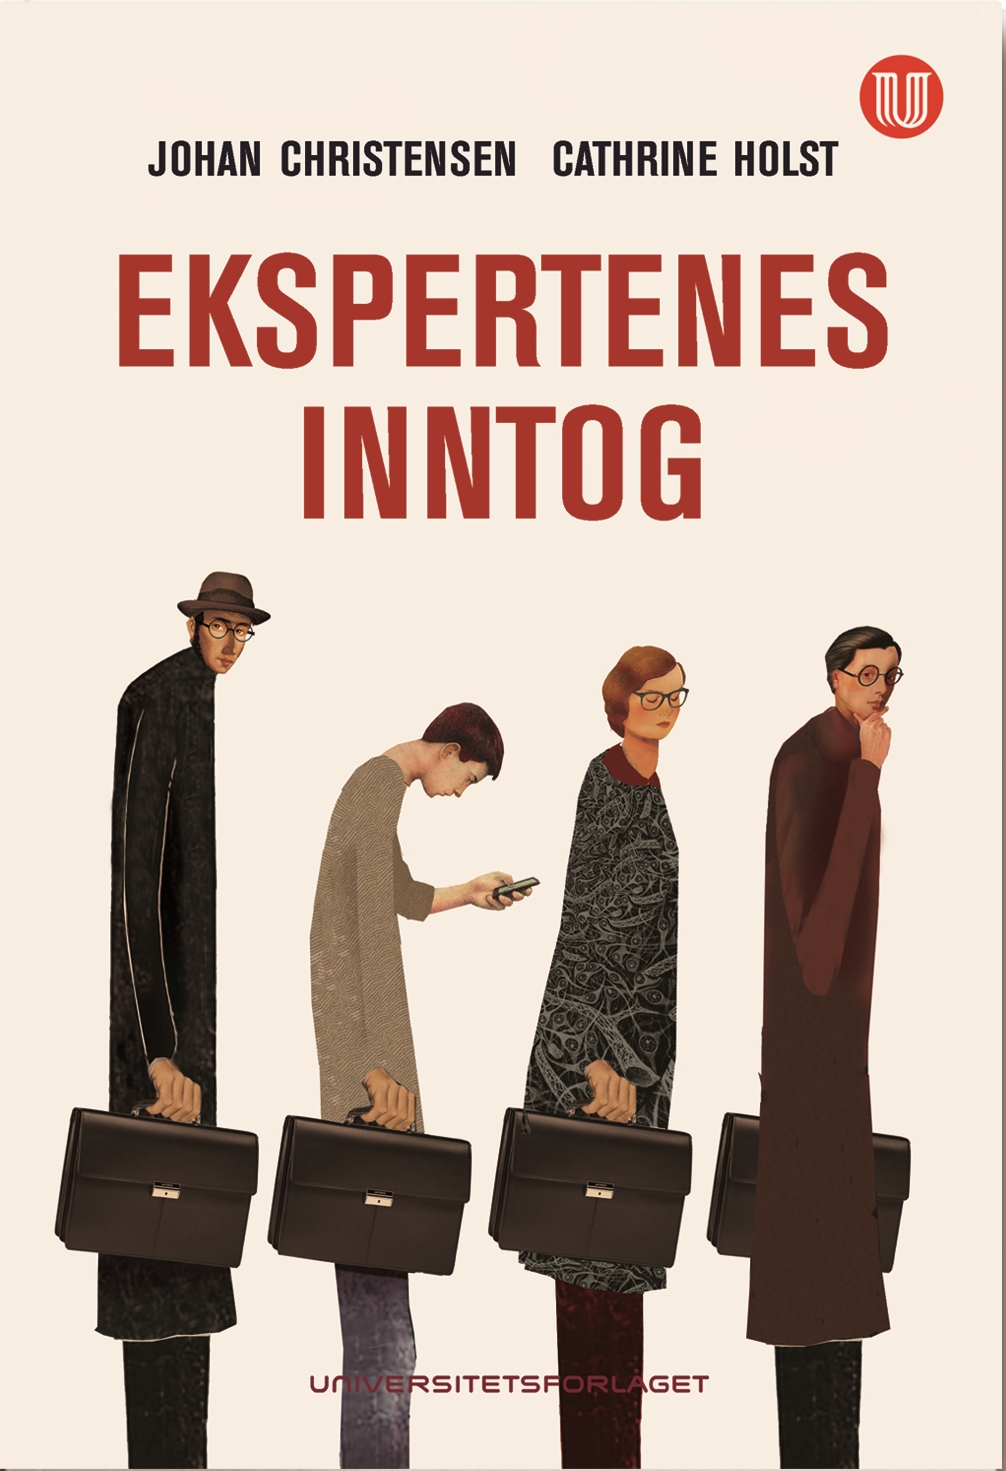 CAS project leader Cathrine Holst and CAS Fellow Johan Christensen published the book "Ekspertenes inntog" (in Norwegian only) in December 2020, about experts' role in Norwegian policy-making.  